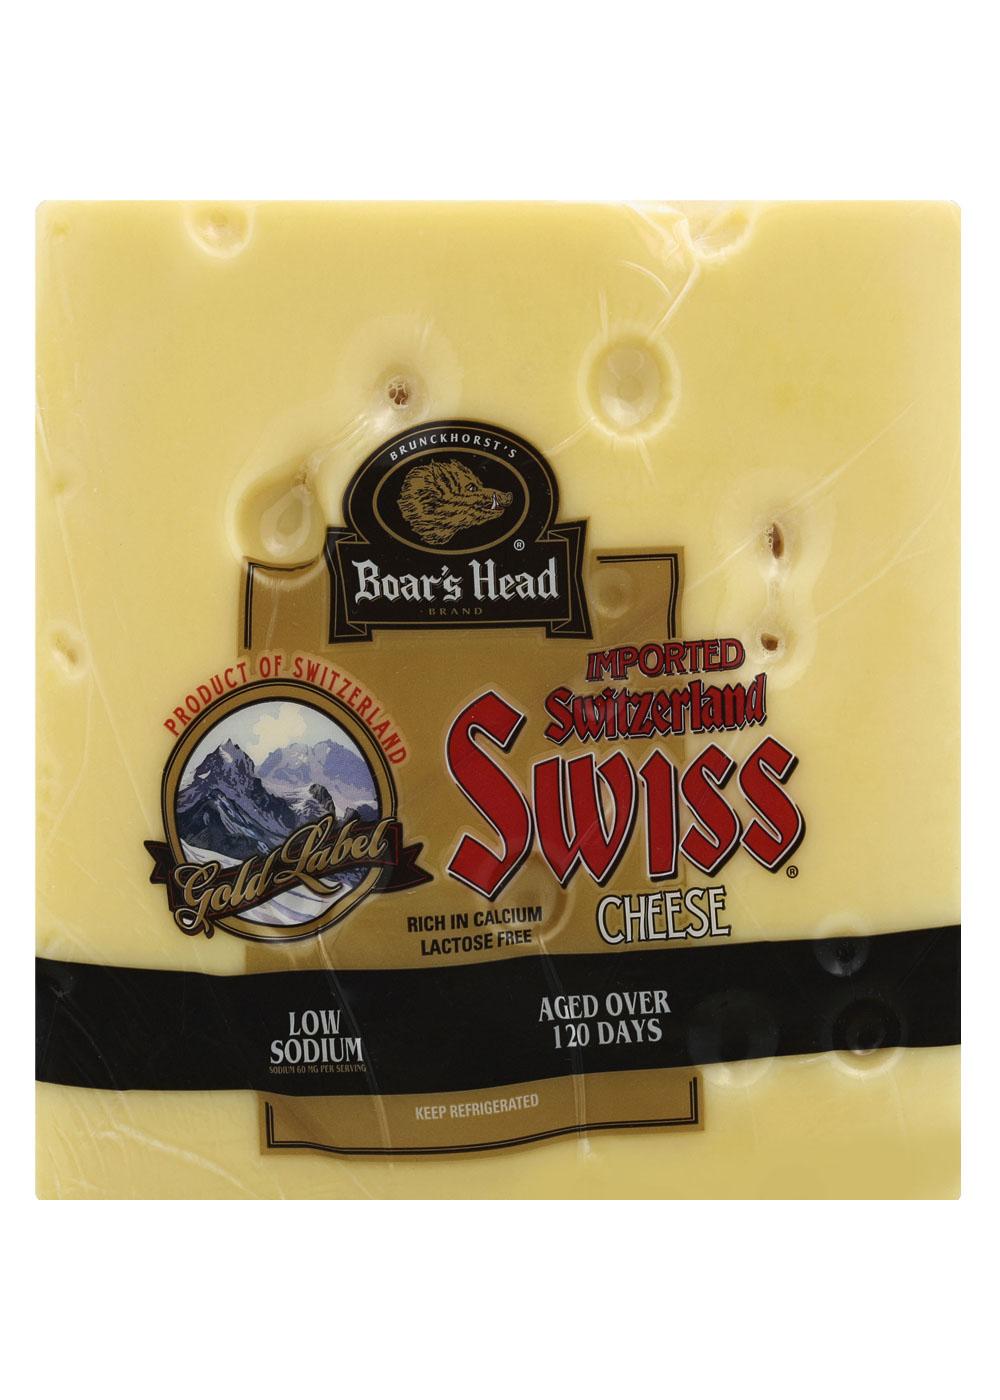 Boar's Head Deli-Sliced Imported Switzerland Swiss Cheese; image 1 of 2